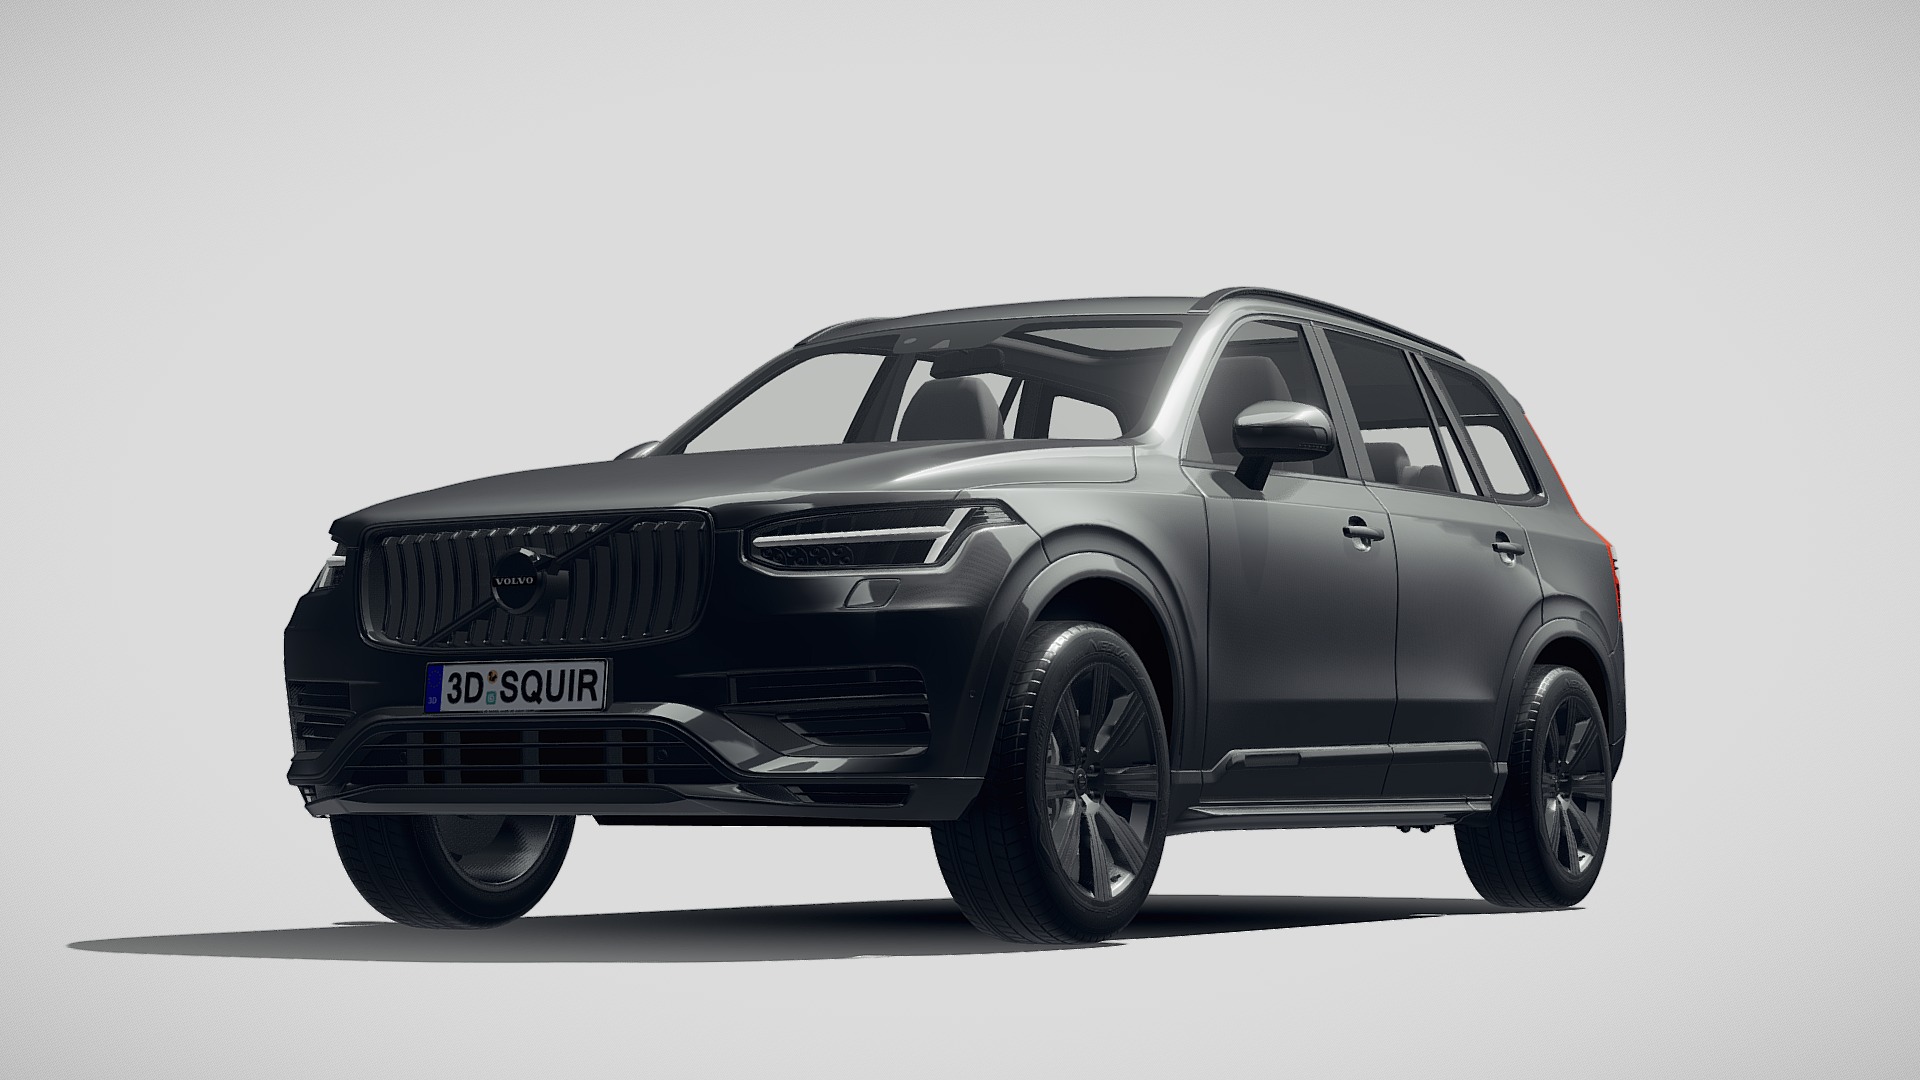 3D model Volvo XC90 2020 - This is a 3D model of the Volvo XC90 2020. The 3D model is about a black car with a white background.